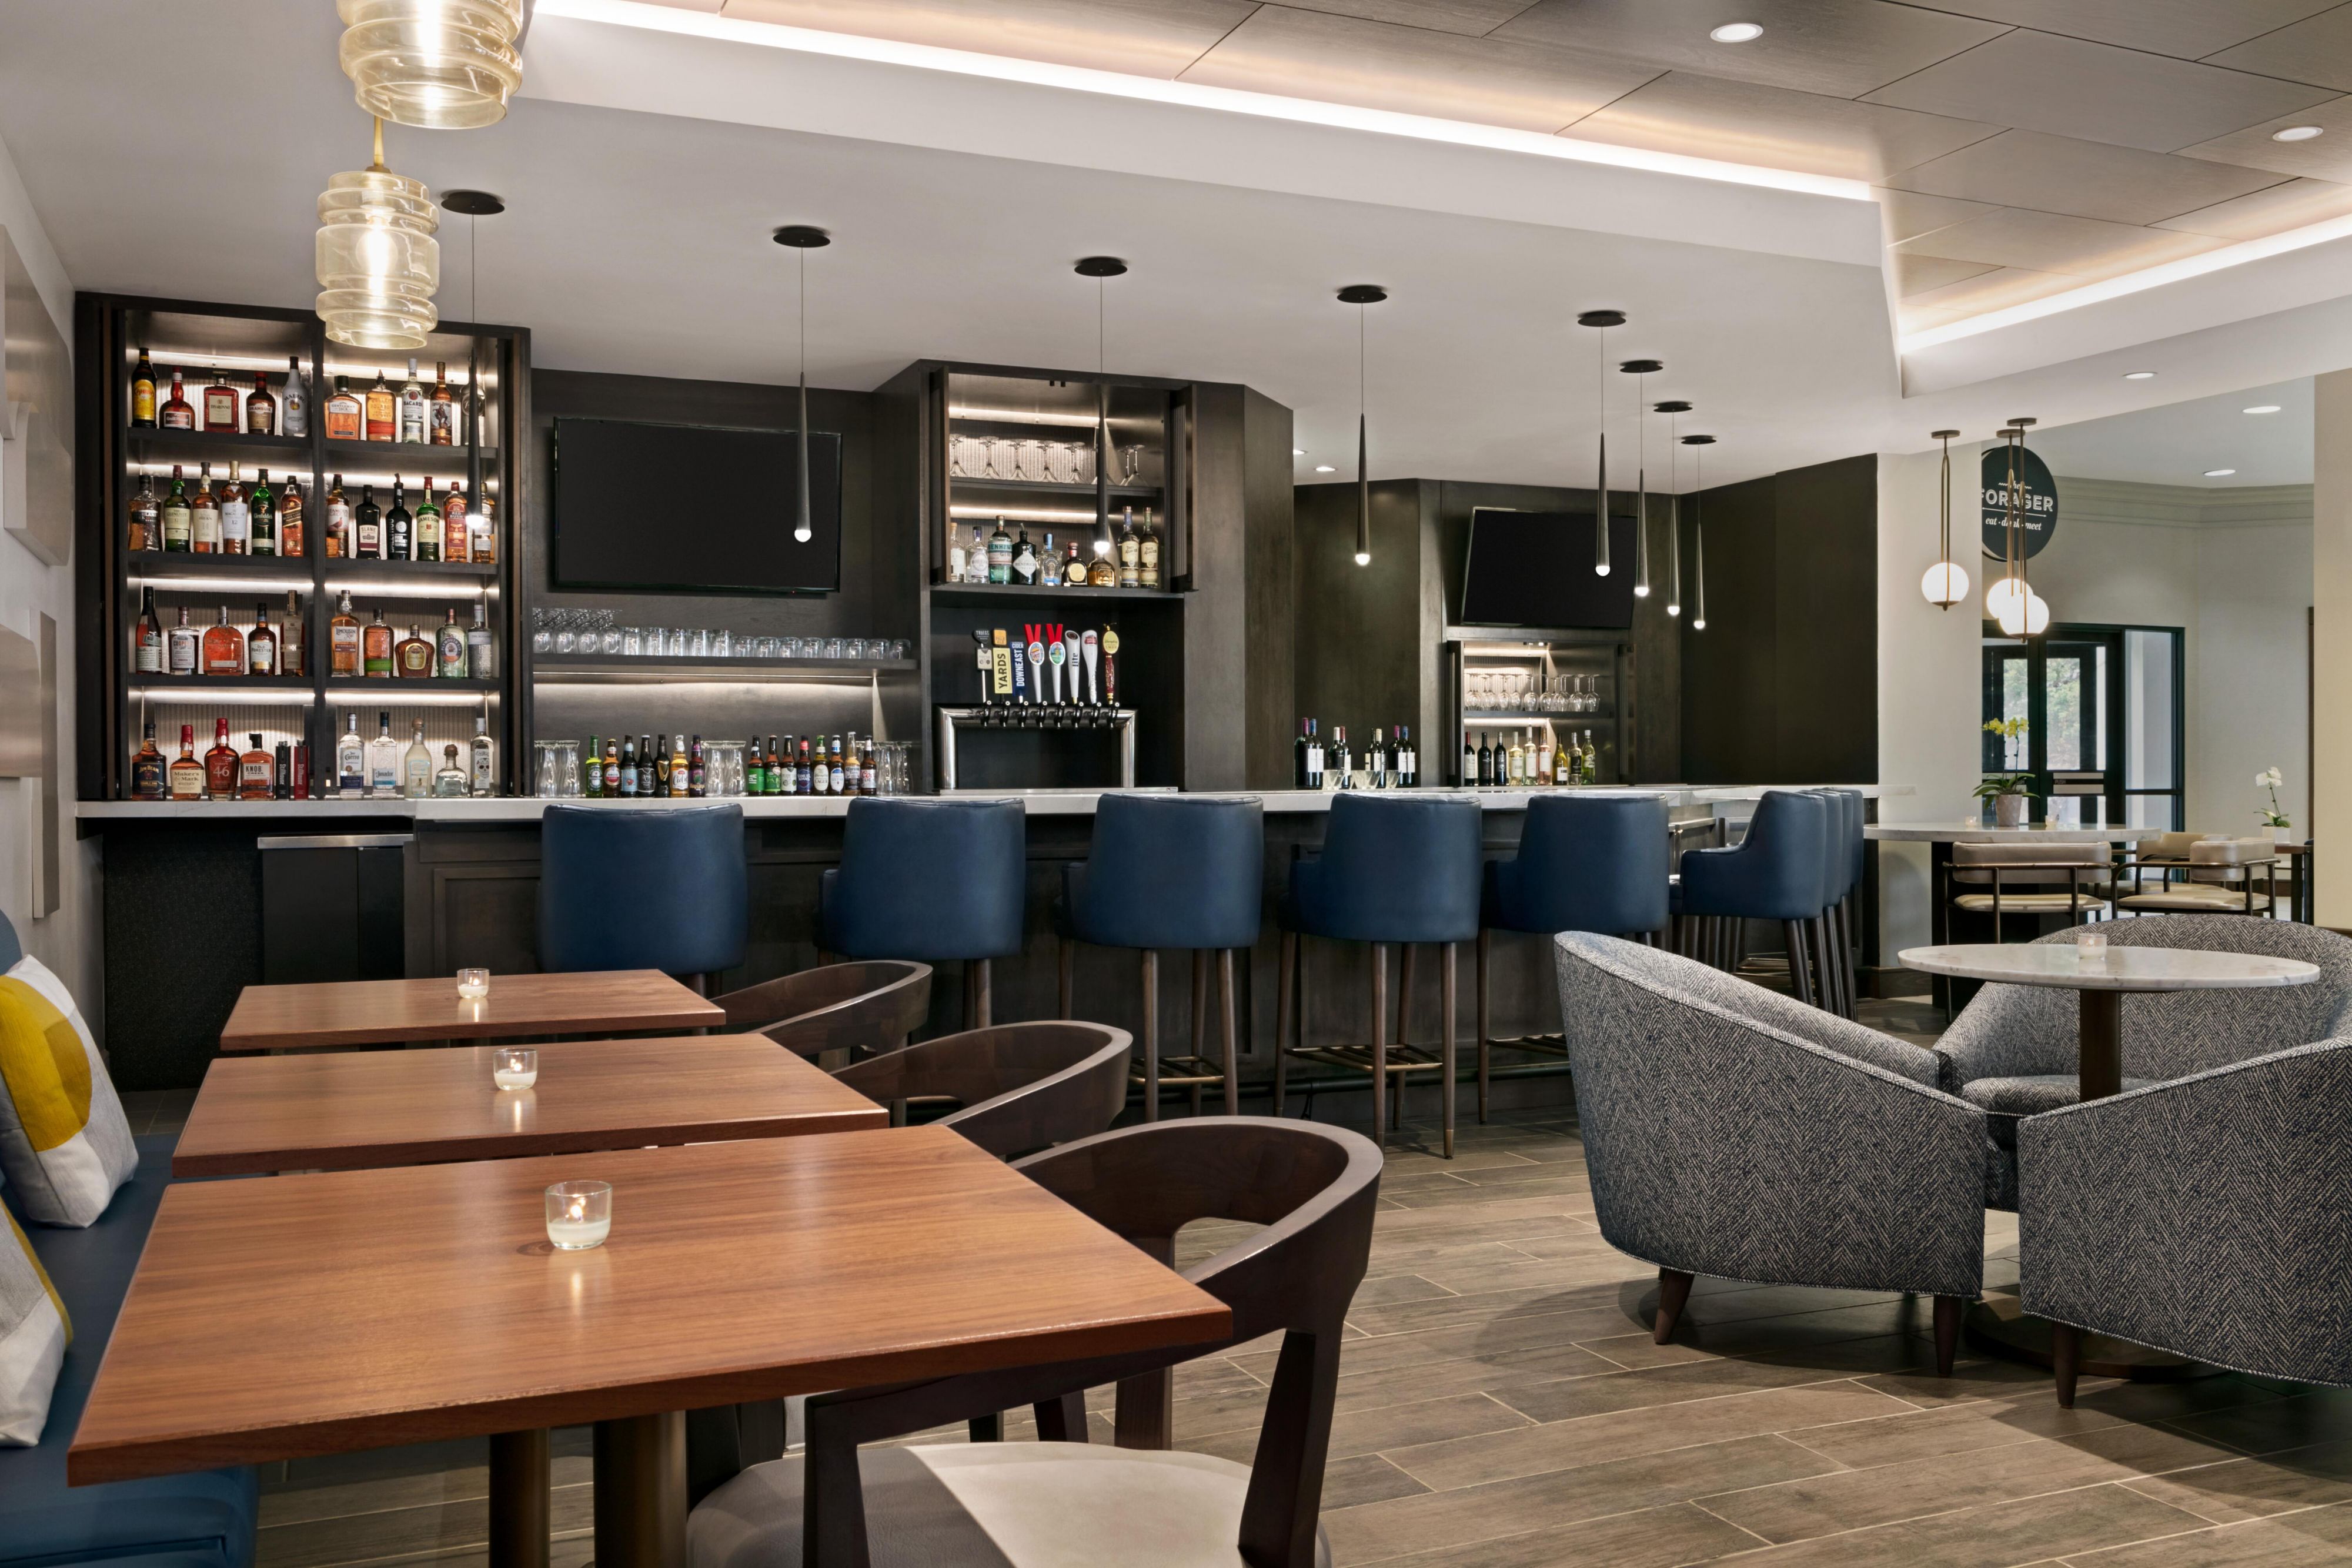 Enjoy breakfast, lunch and dinner at our new Forager Restaurant.